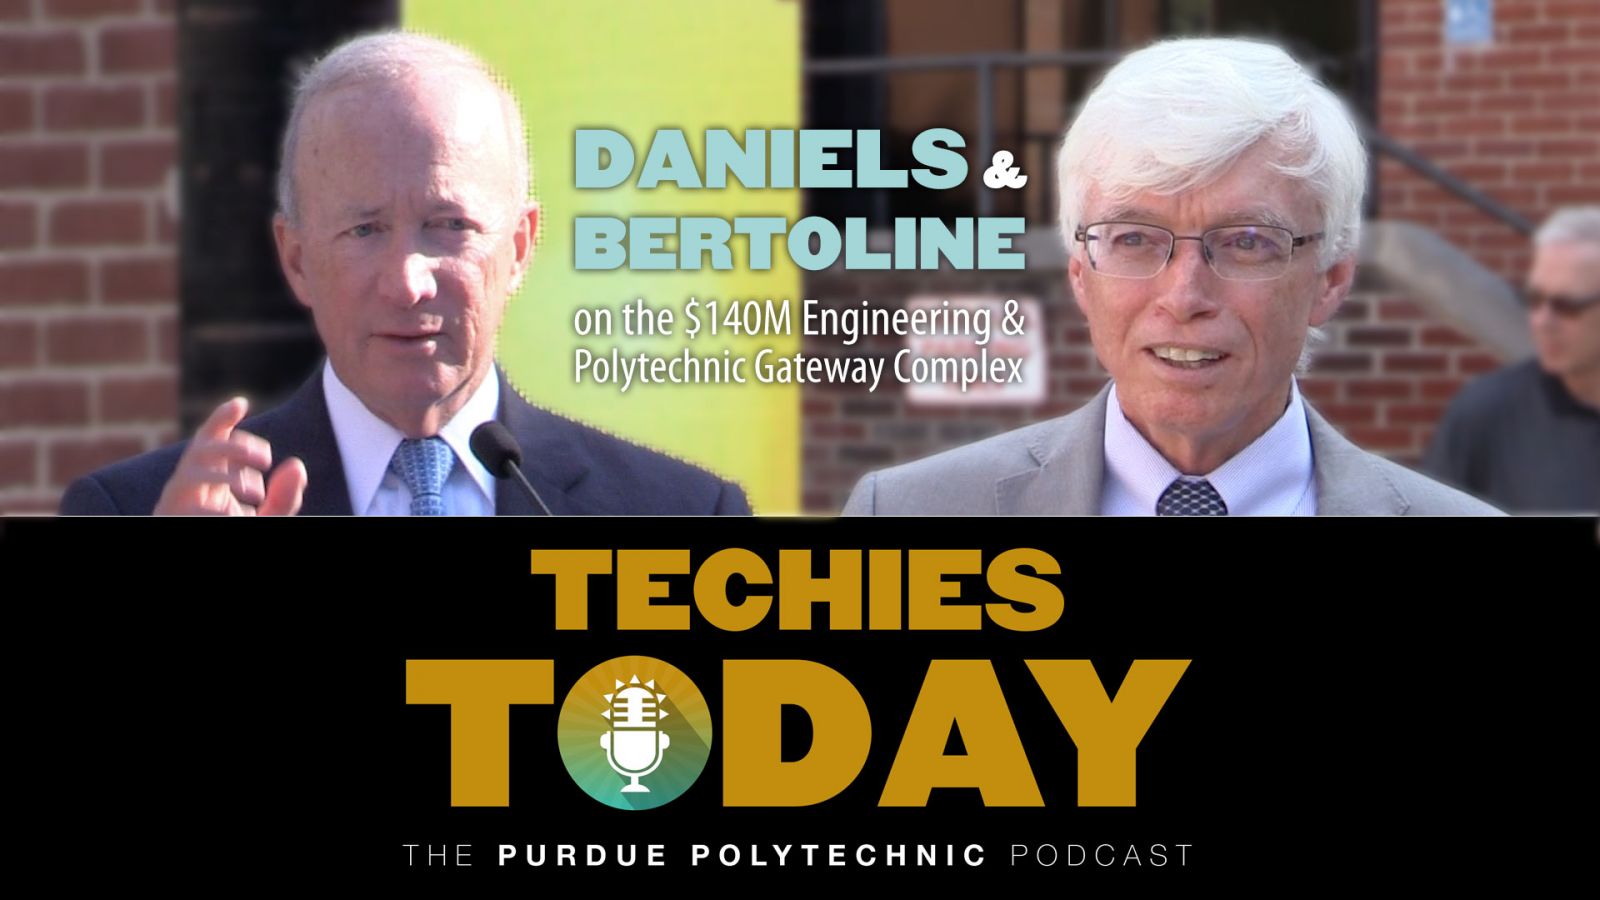 Mitch Daniels & Gary Bertoline, $140M Gateway Complex, on Techies Today, the Purdue Polytechnic Podcast